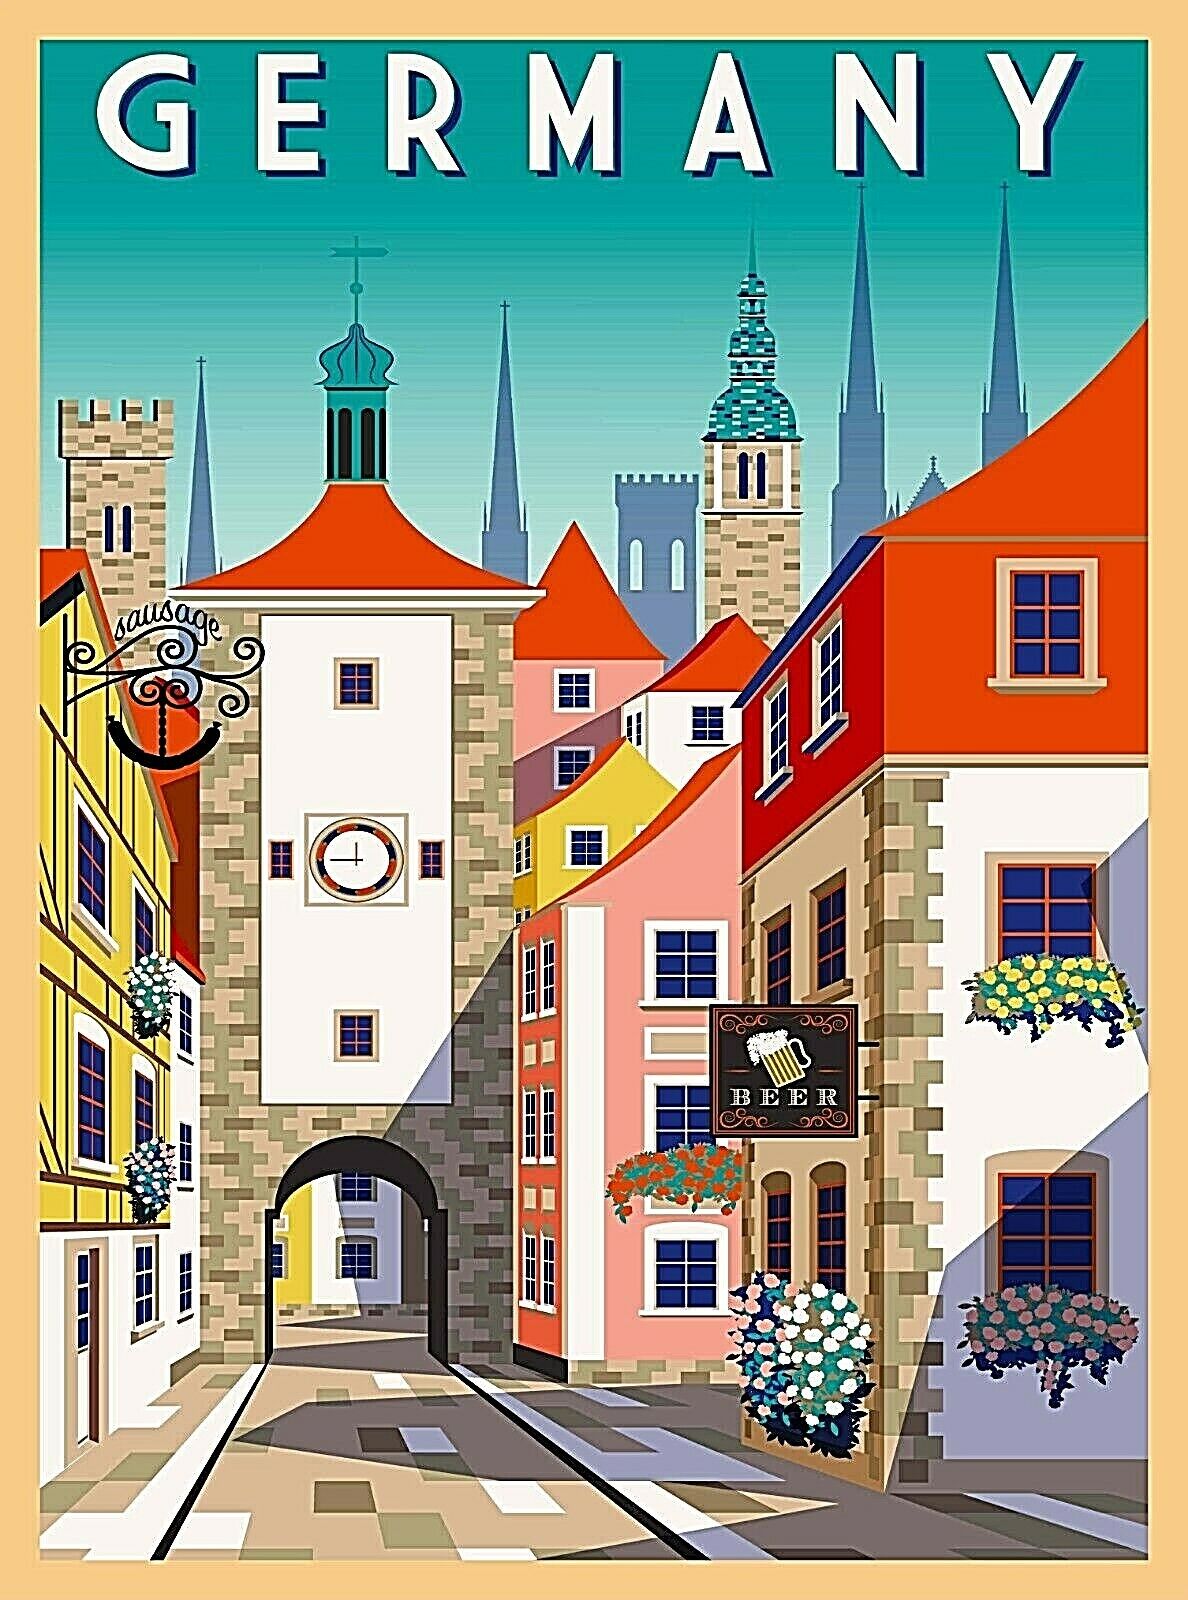 Germany Village Street Retro Home Collectible Wall Decor Travel Art Poster Print